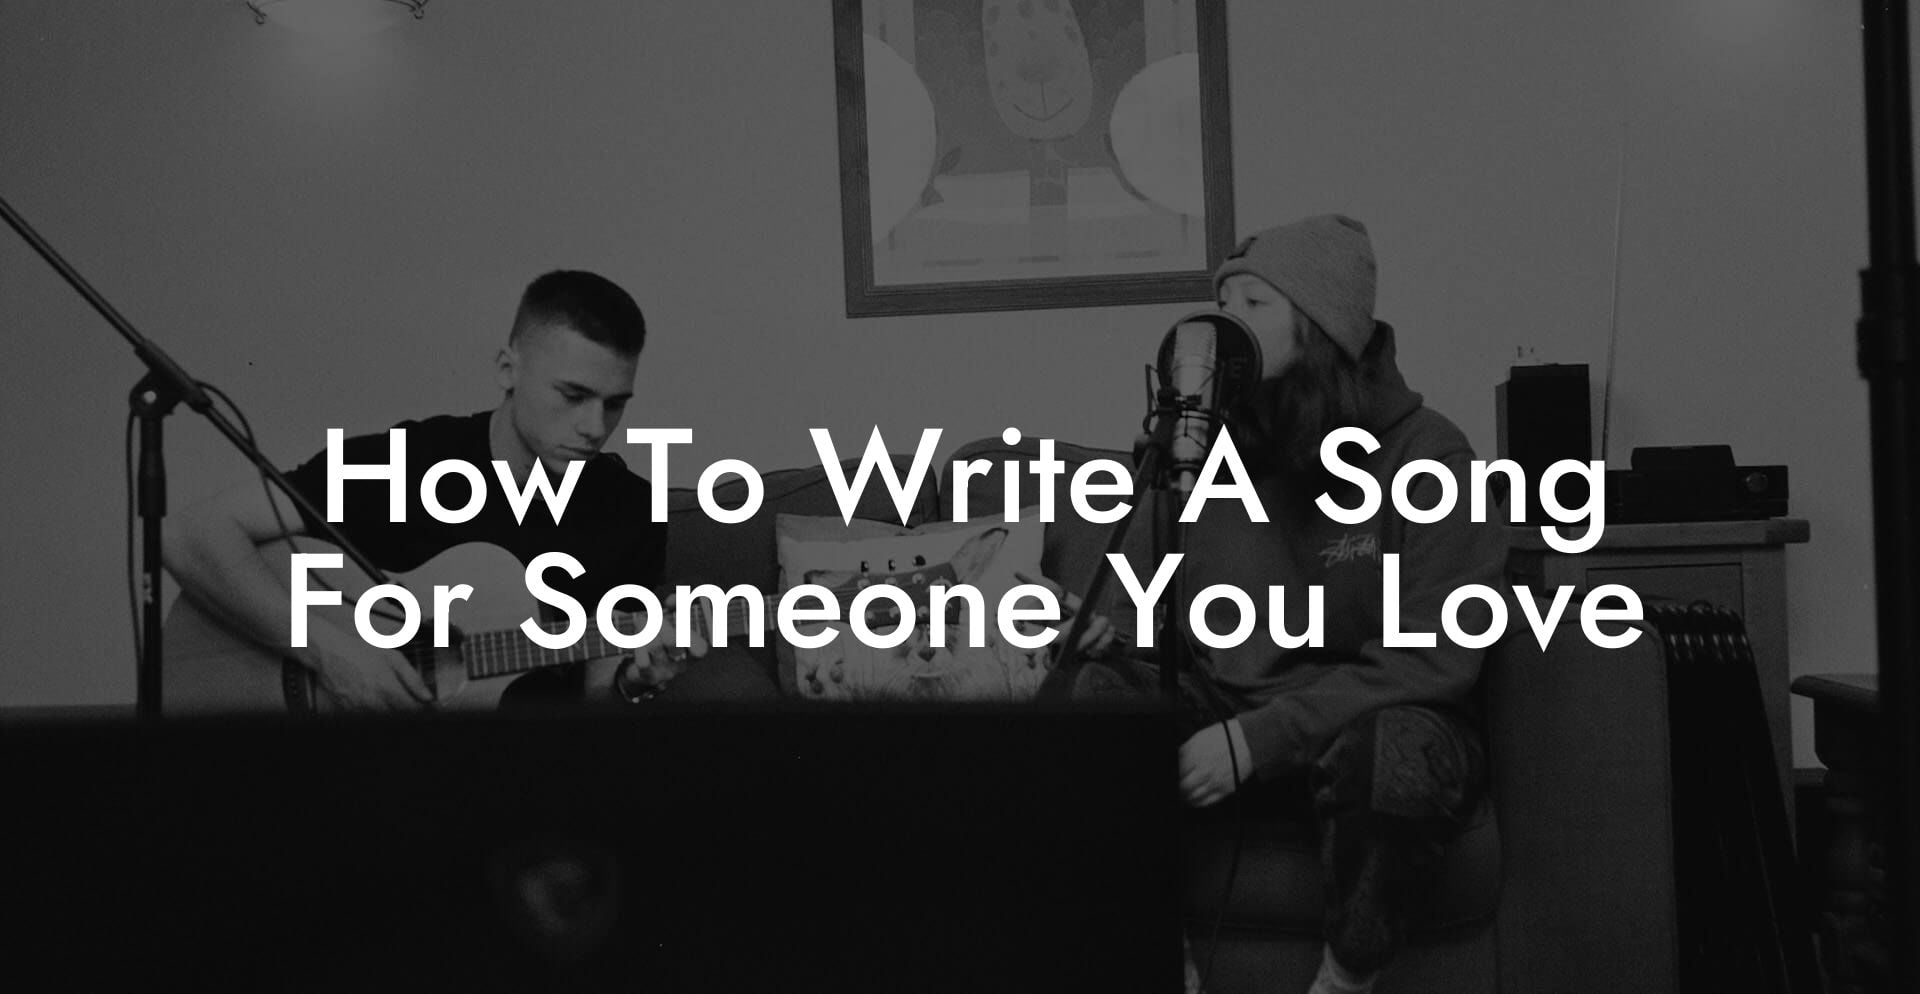 how to write a song for someone you love lyric assistant